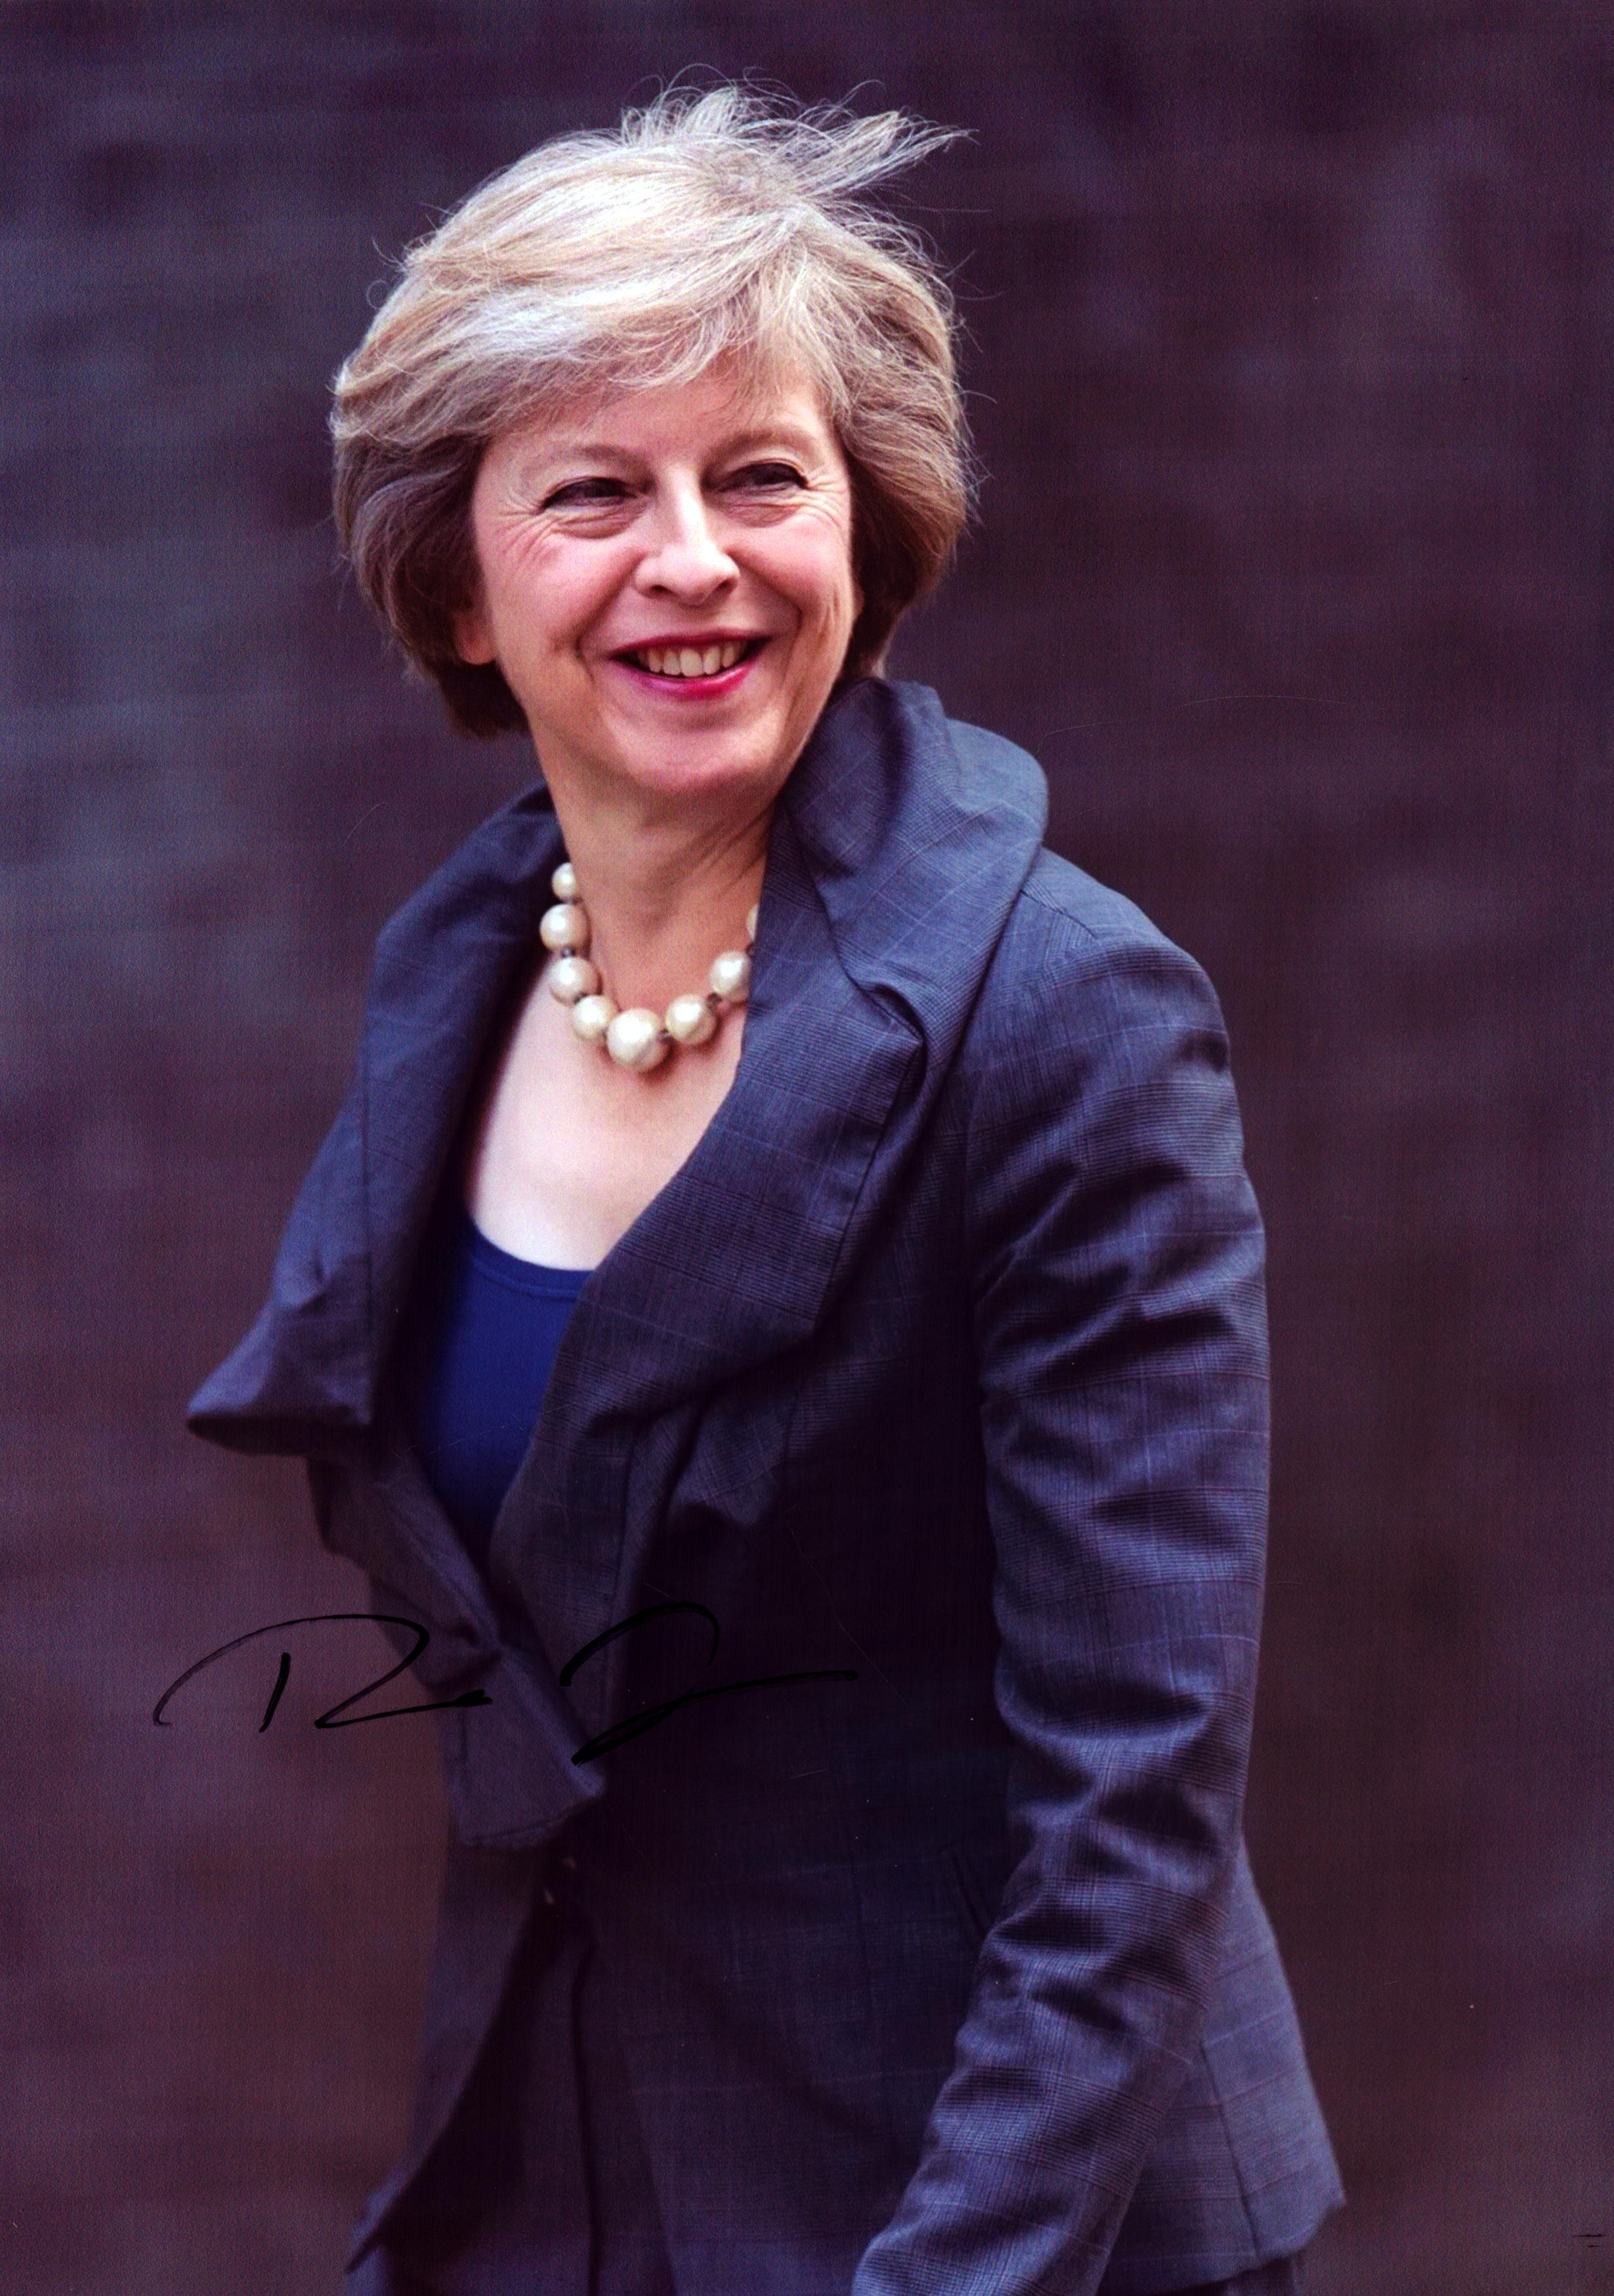 Theresa May signed colour photo. Measures 8 inch by 11-inch appx. Good Condition. All autographs